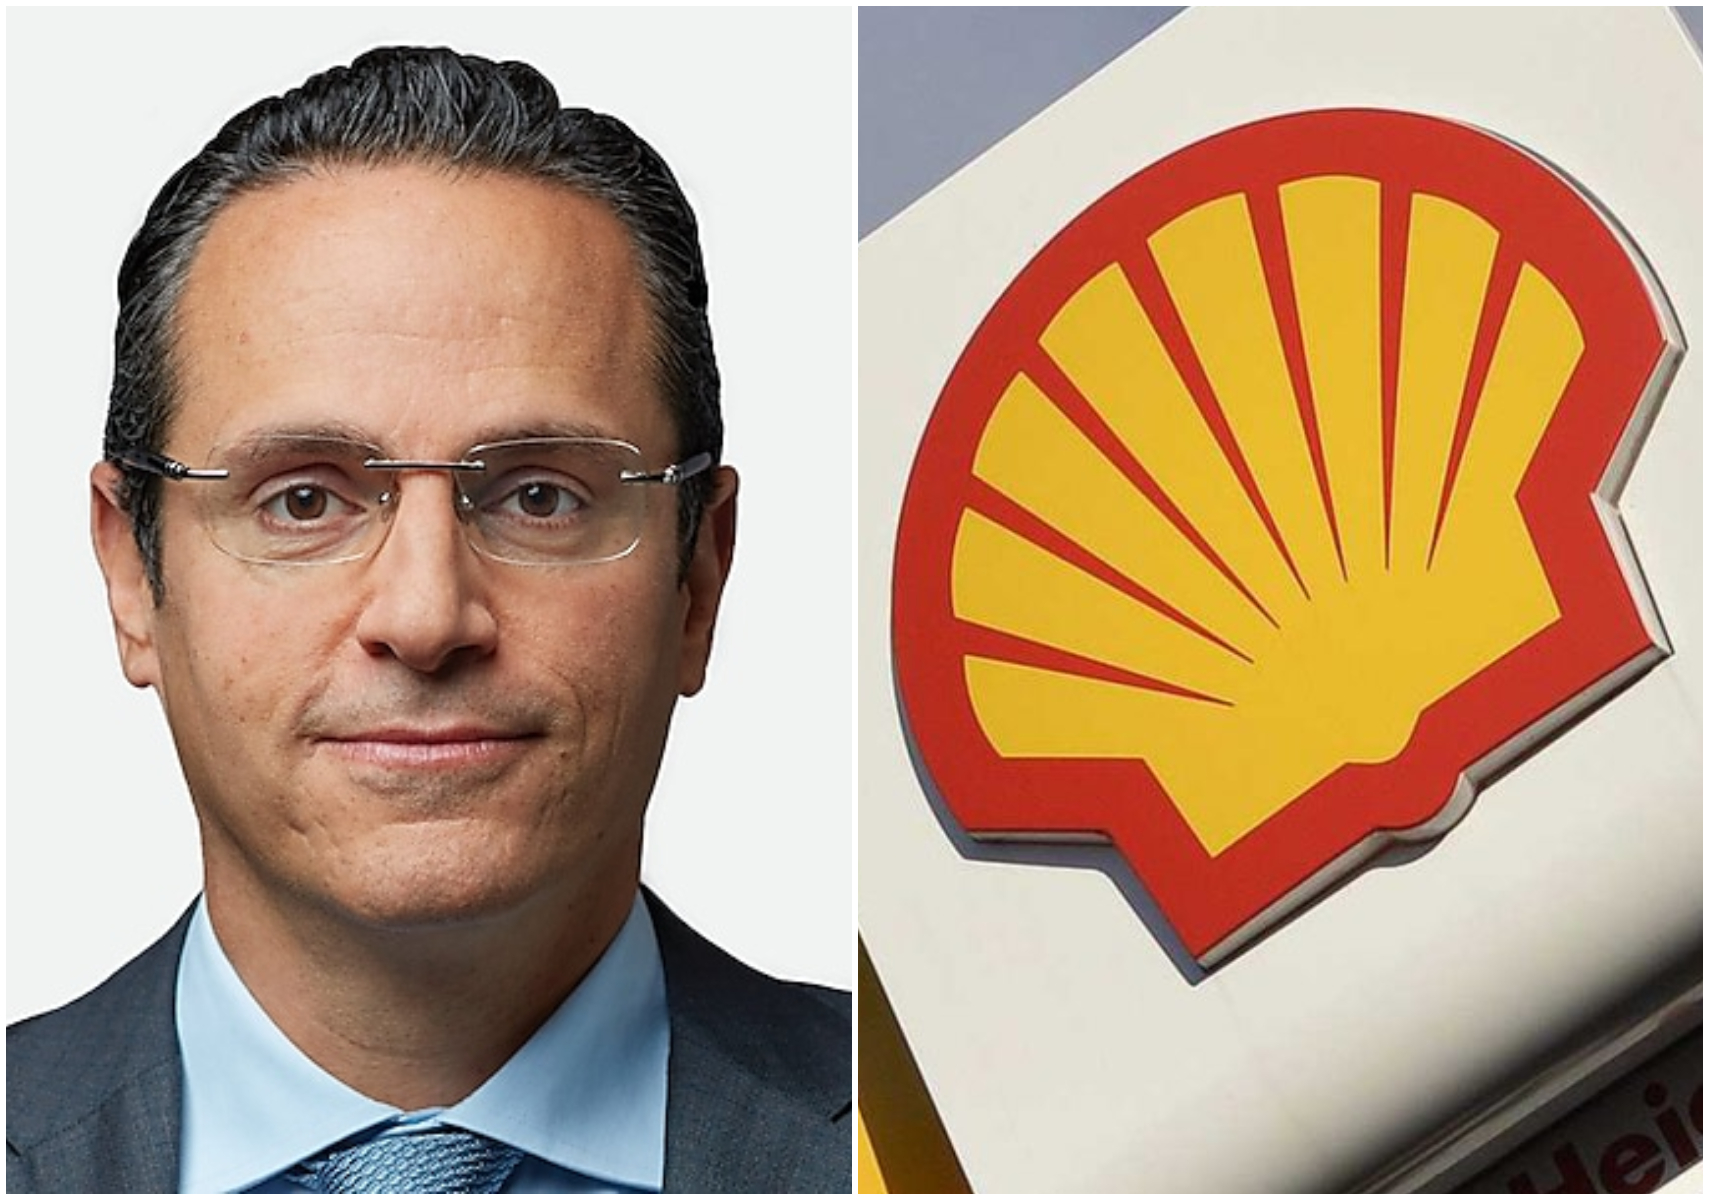 Shell appointed Wael Sawan as a new chief executive